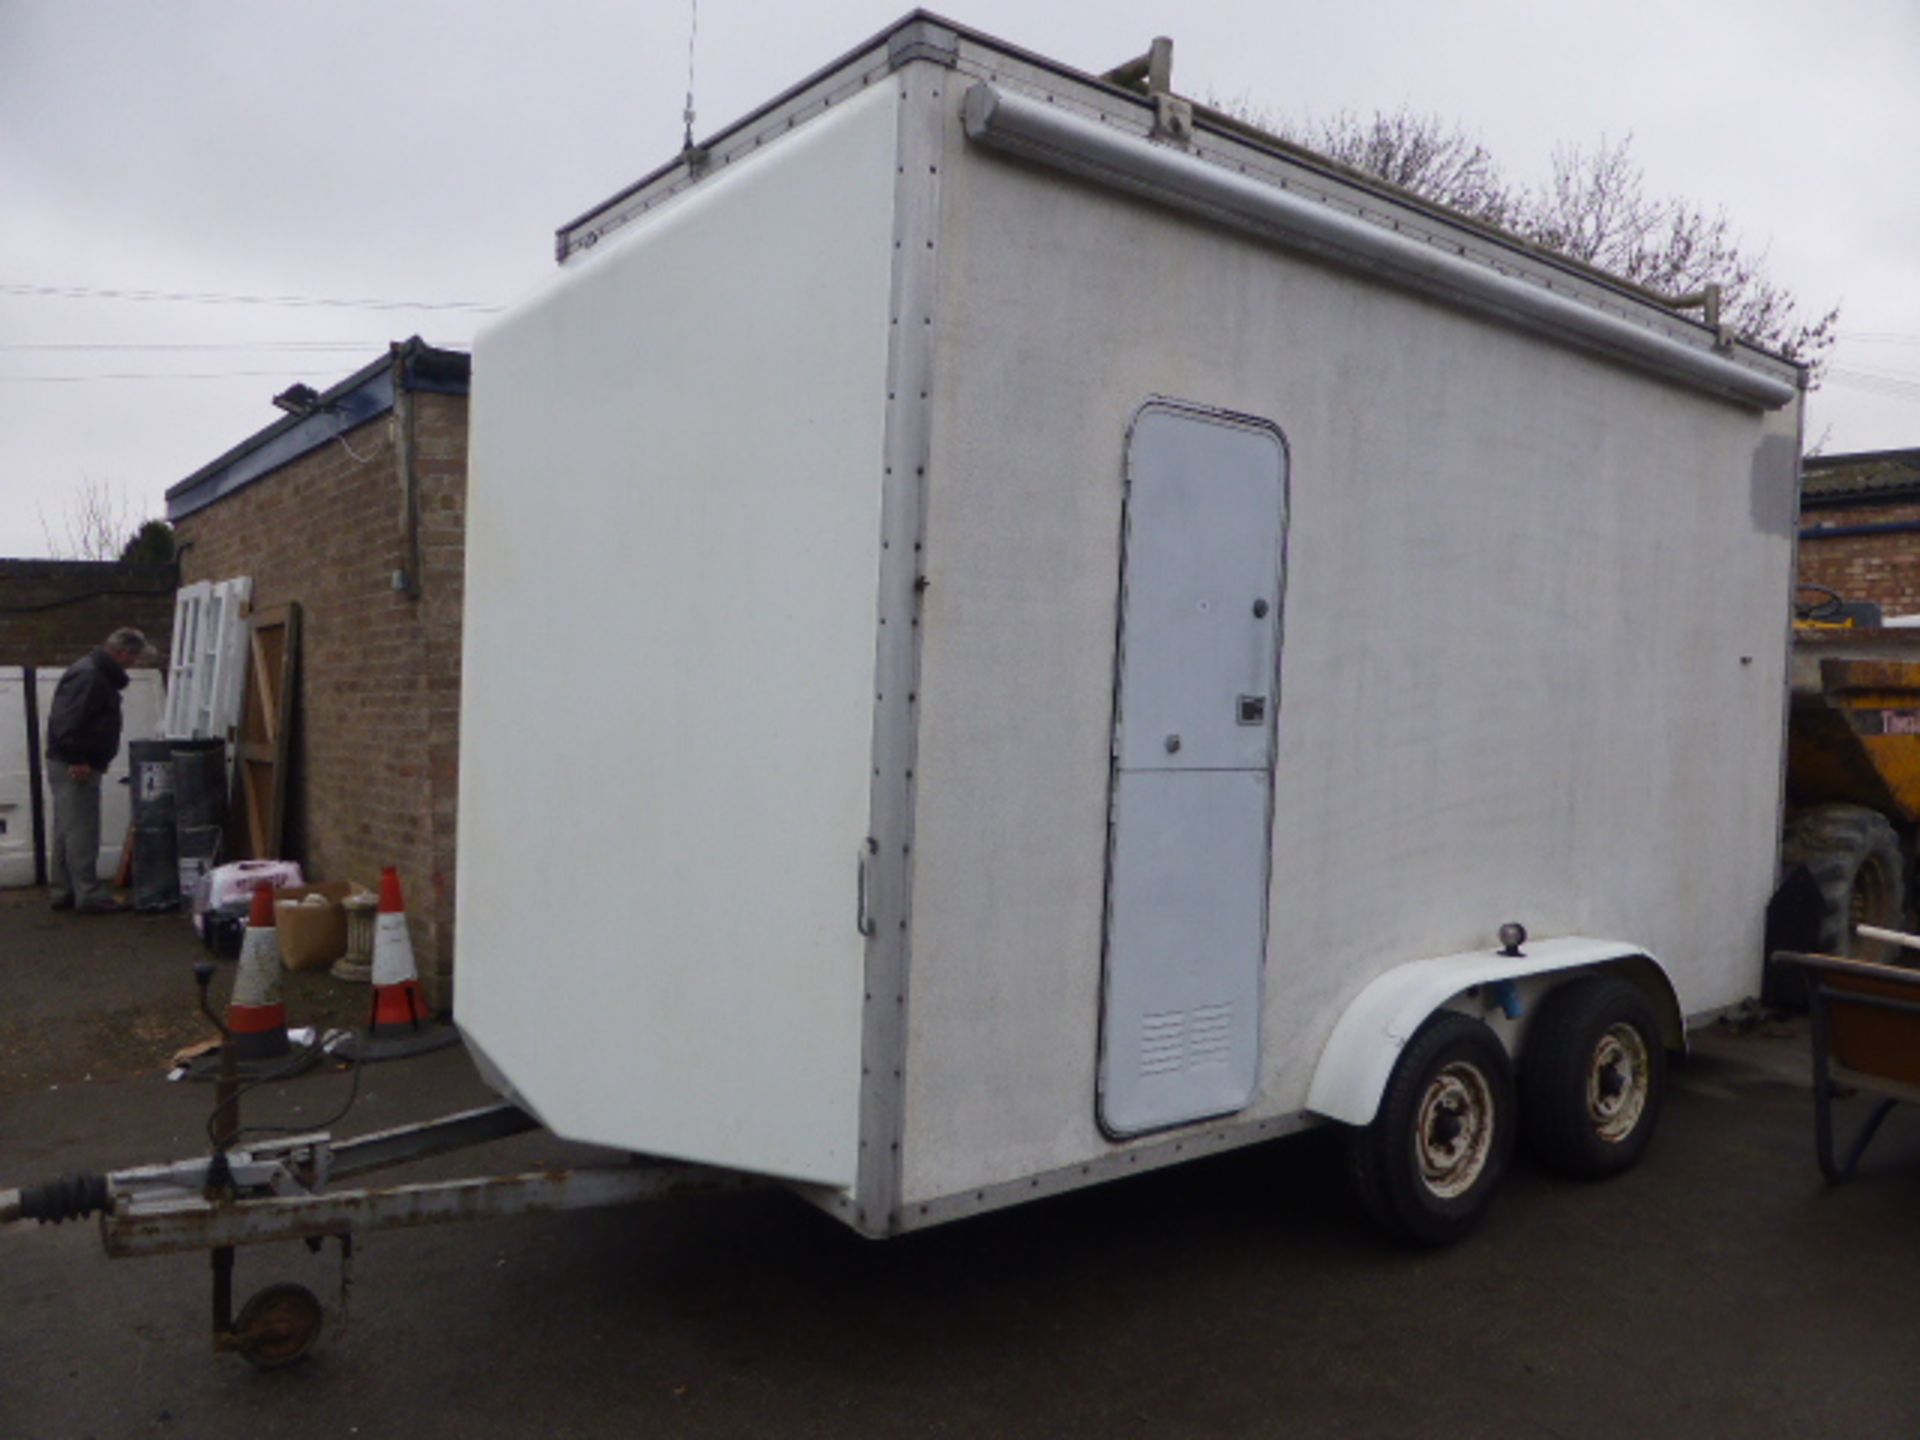 13' x 5' twin axle box trailer used recently as site office with roller door to rear, side door..